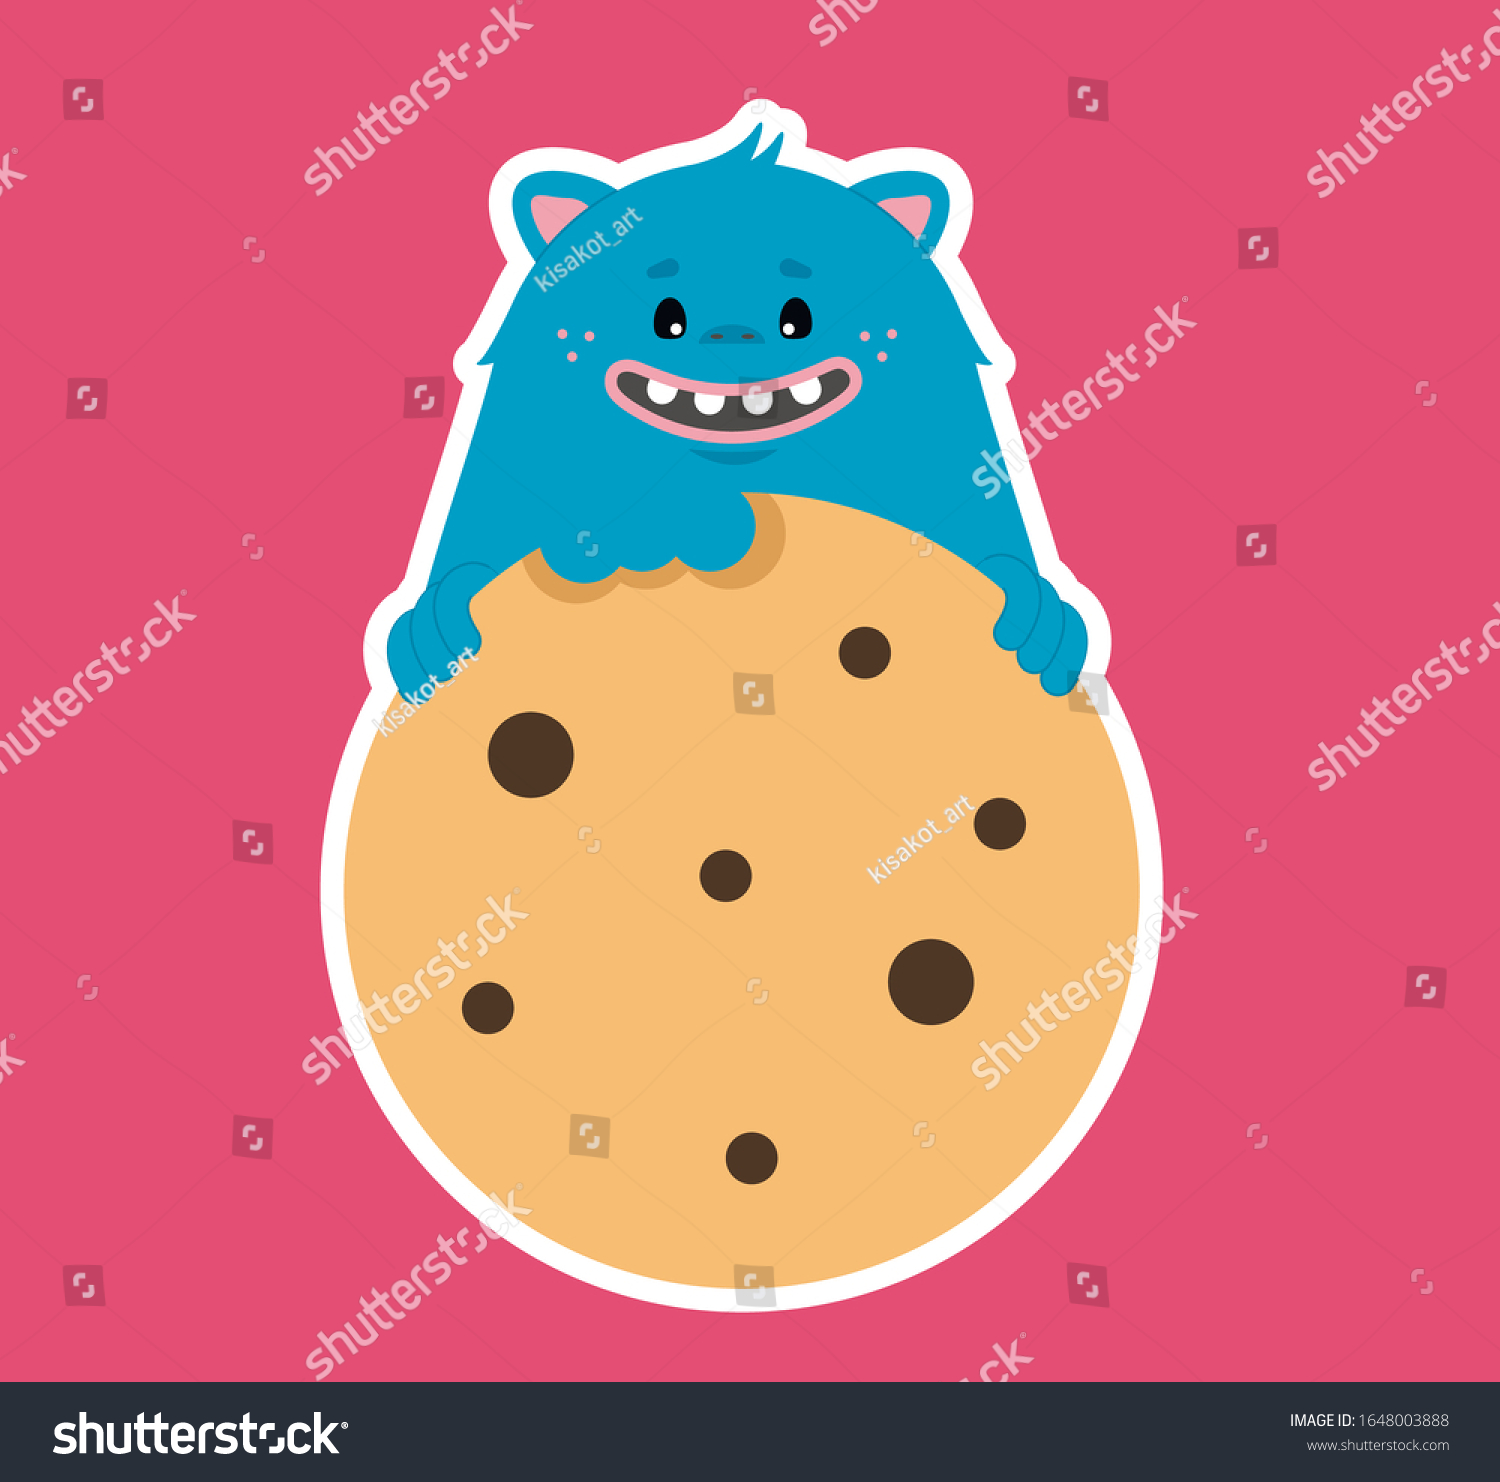 SVG of Bakery shop logo with cookie and happy monster. Gift card svg